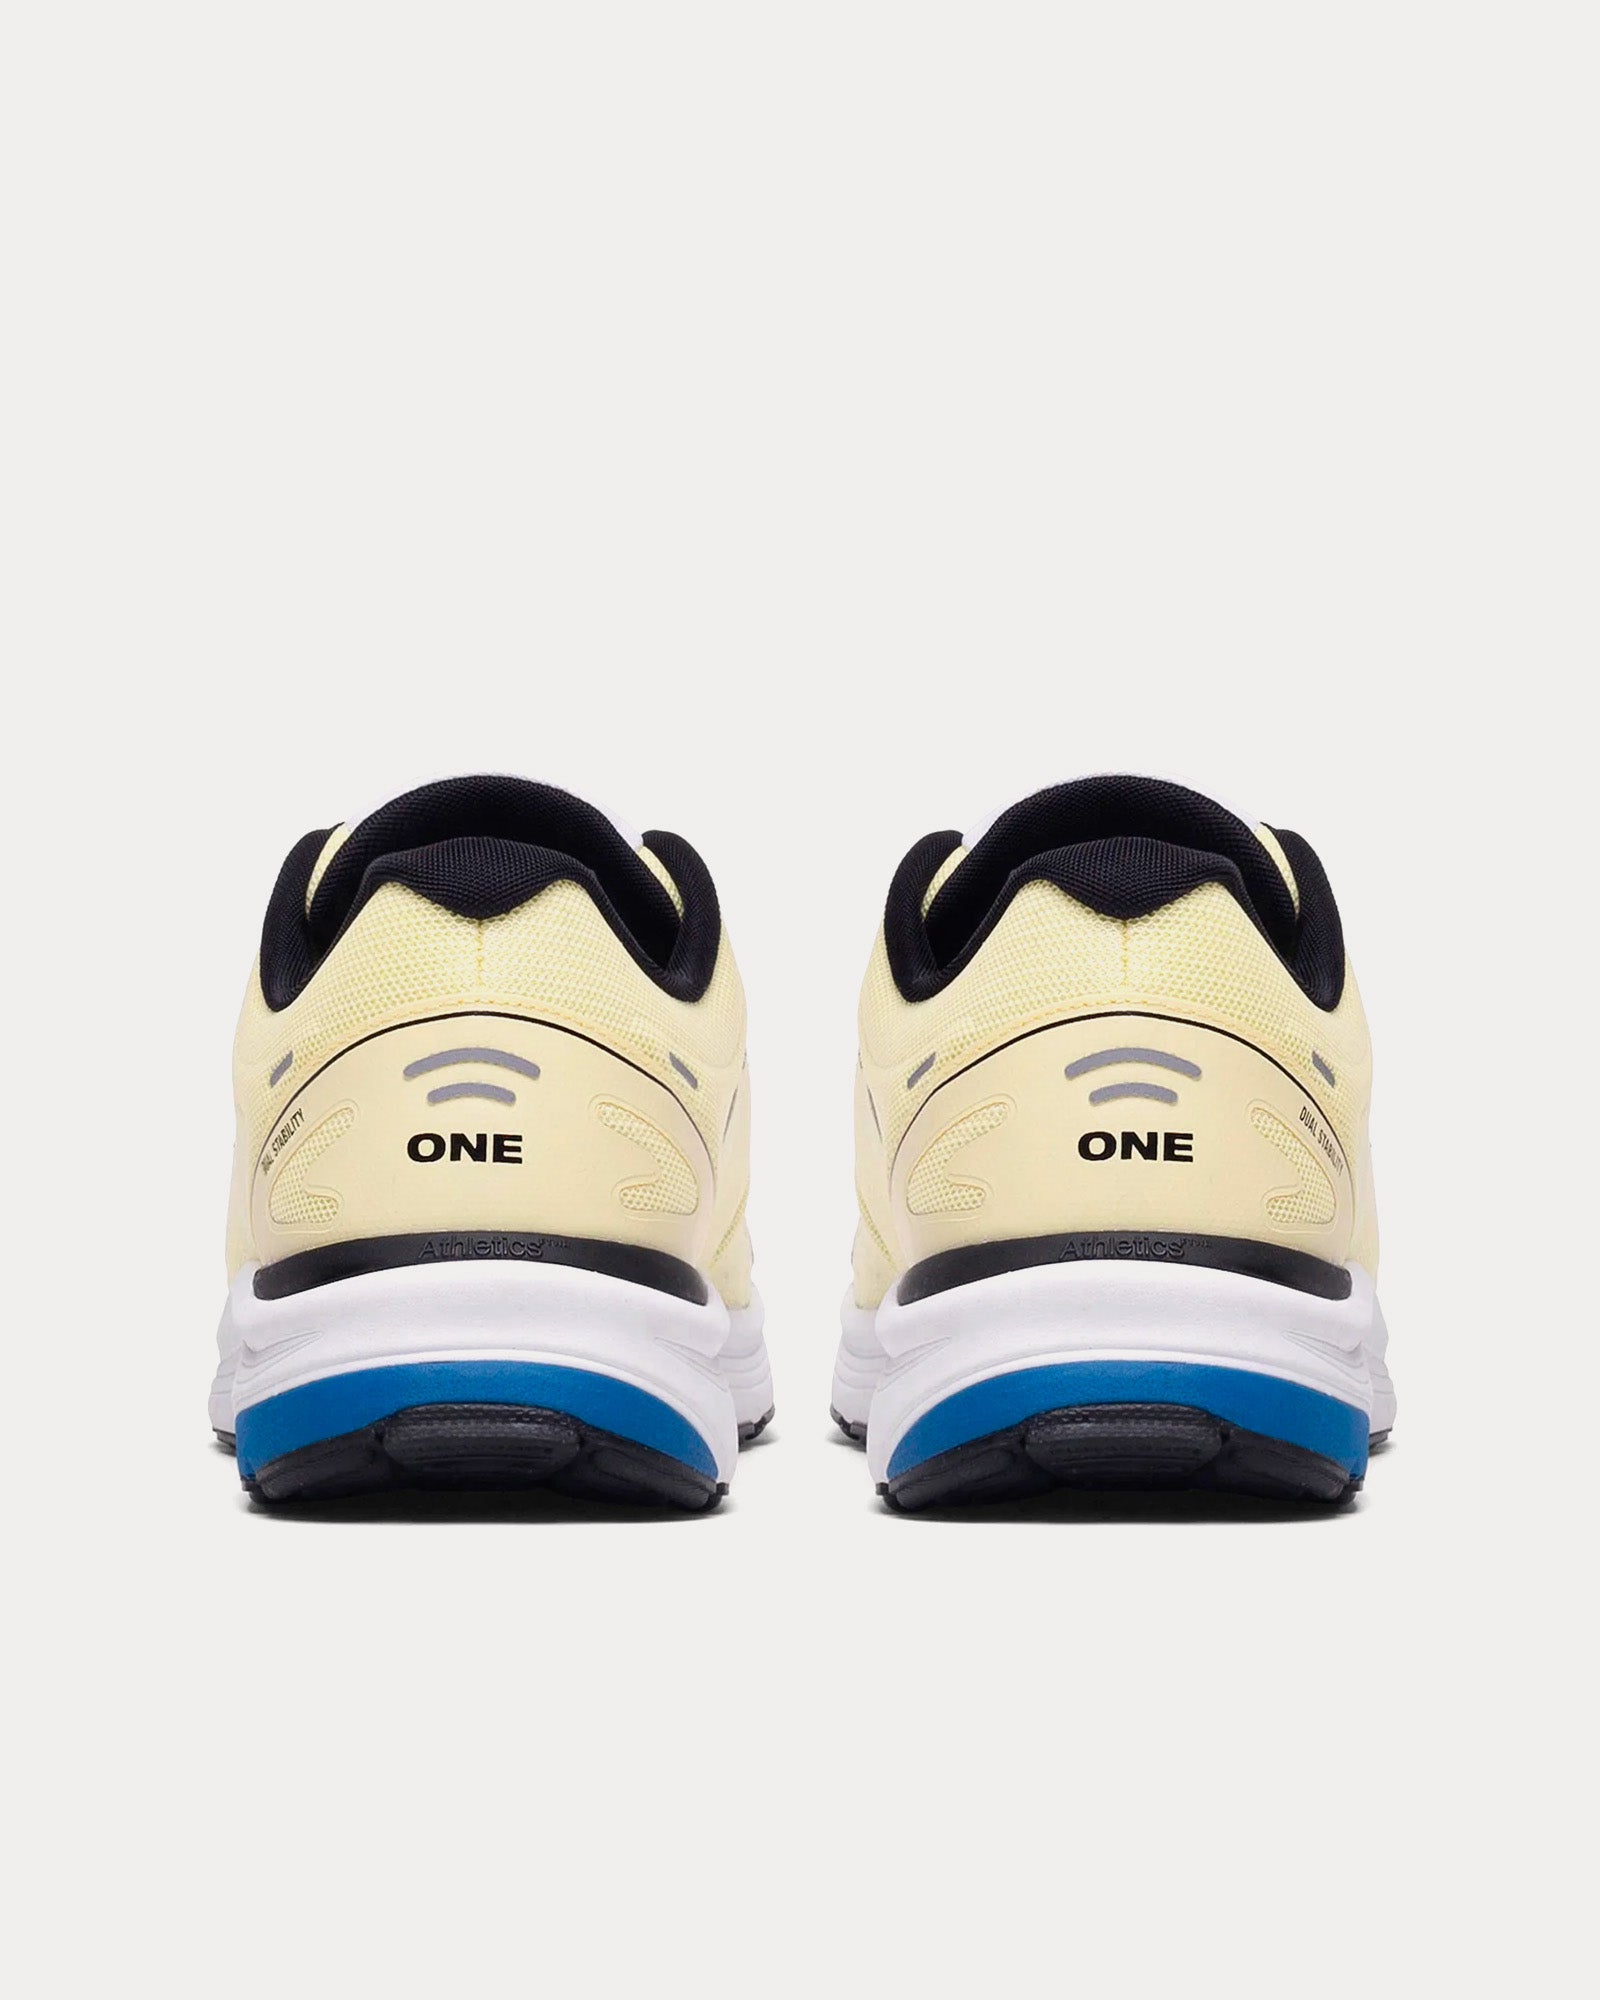 Athletics FTWR - One Remastered Wax Yellow Low Top Sneakers